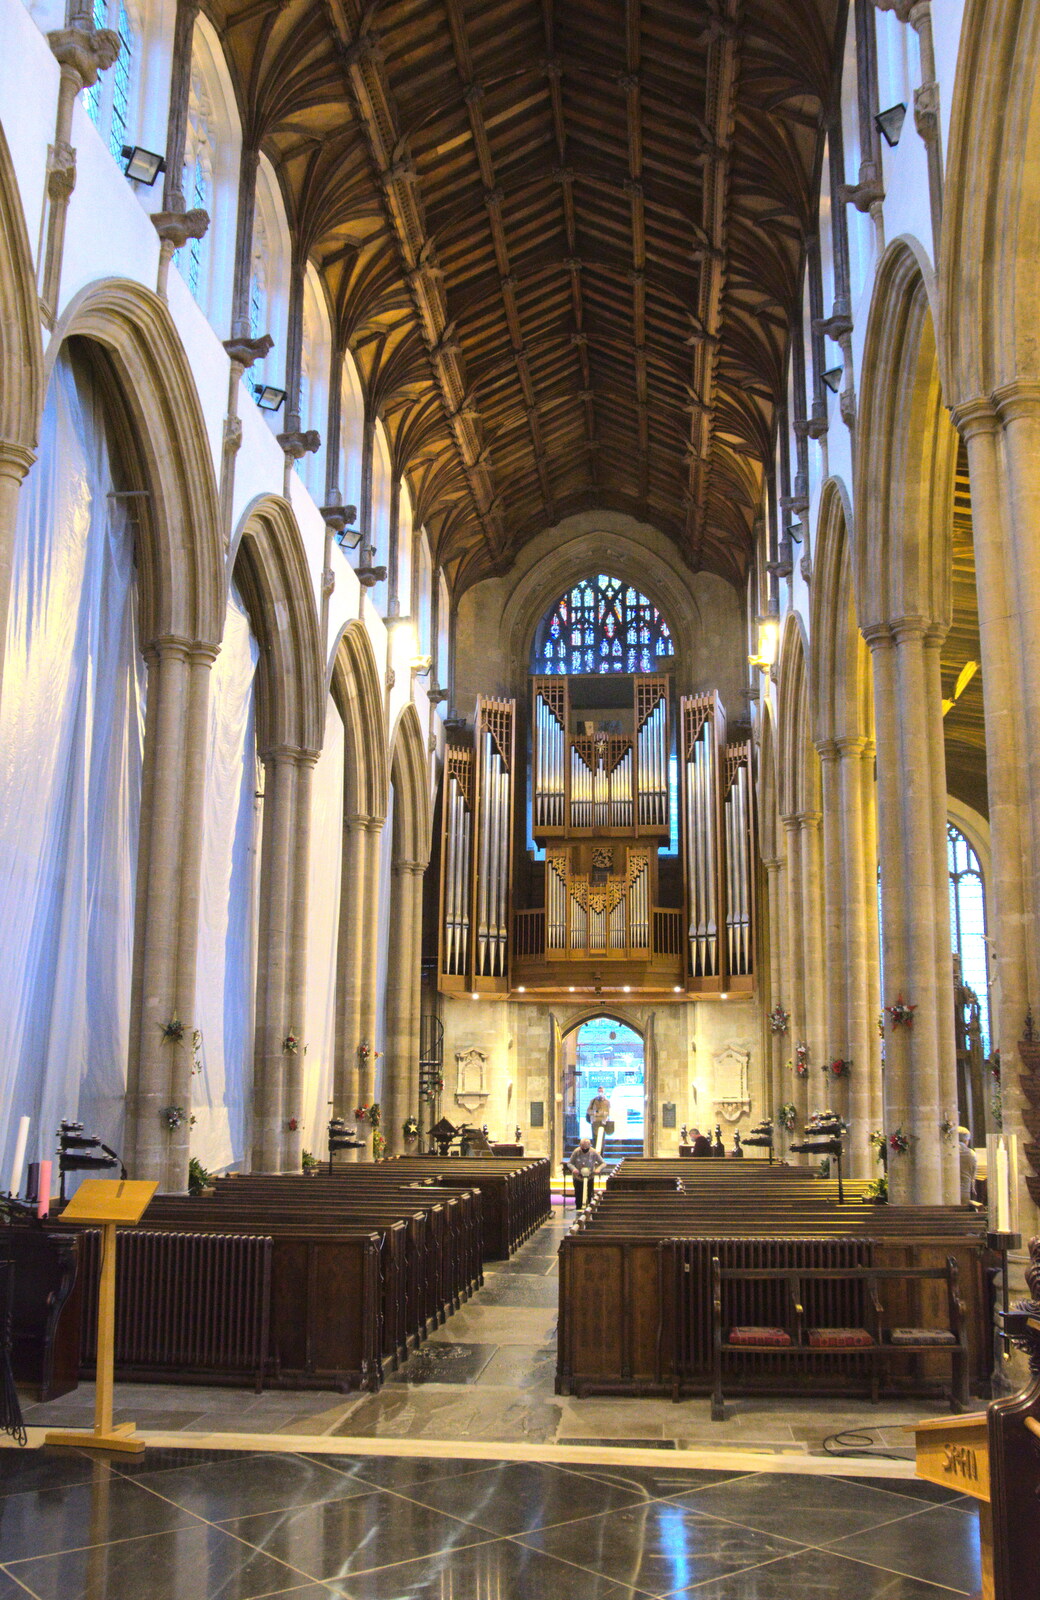 The nave of the church from A Bit of Christmas Shopping, Norwich, Norfolk - 23rd December 2020